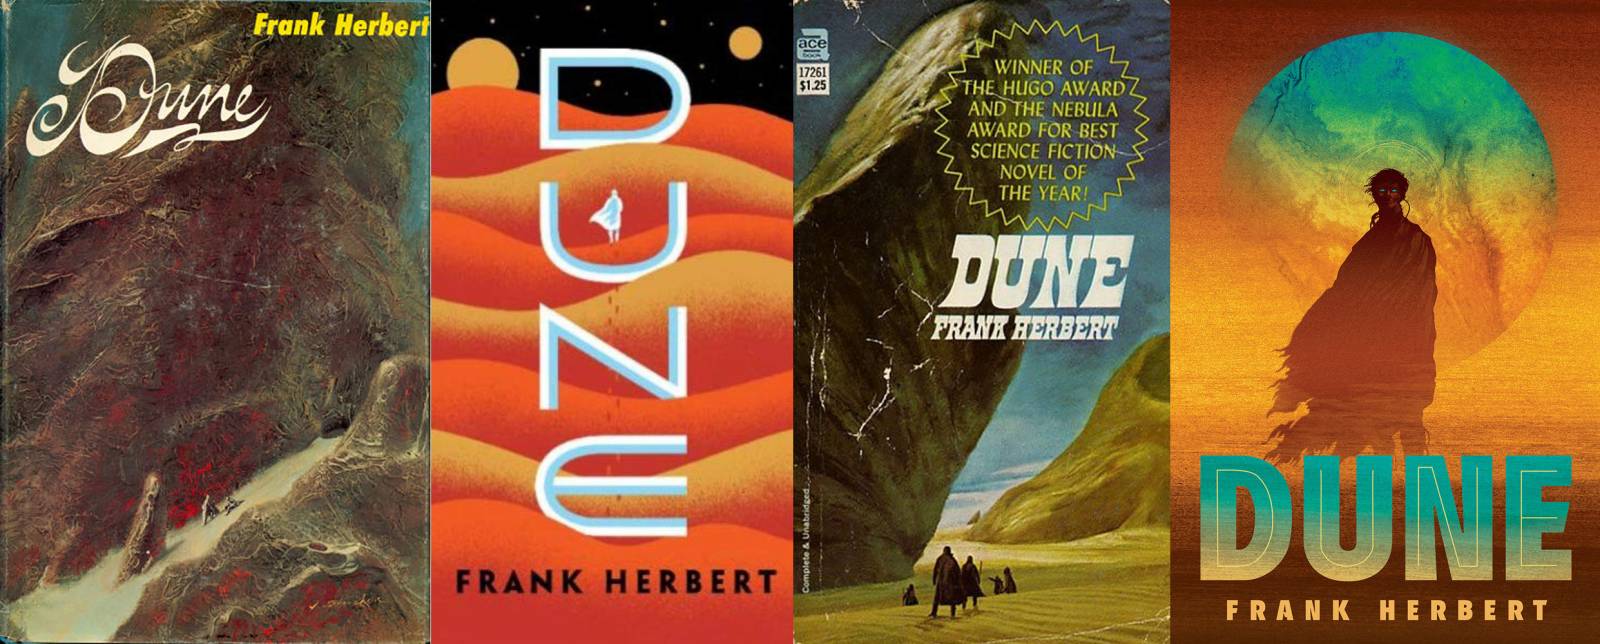 what is the second dune book